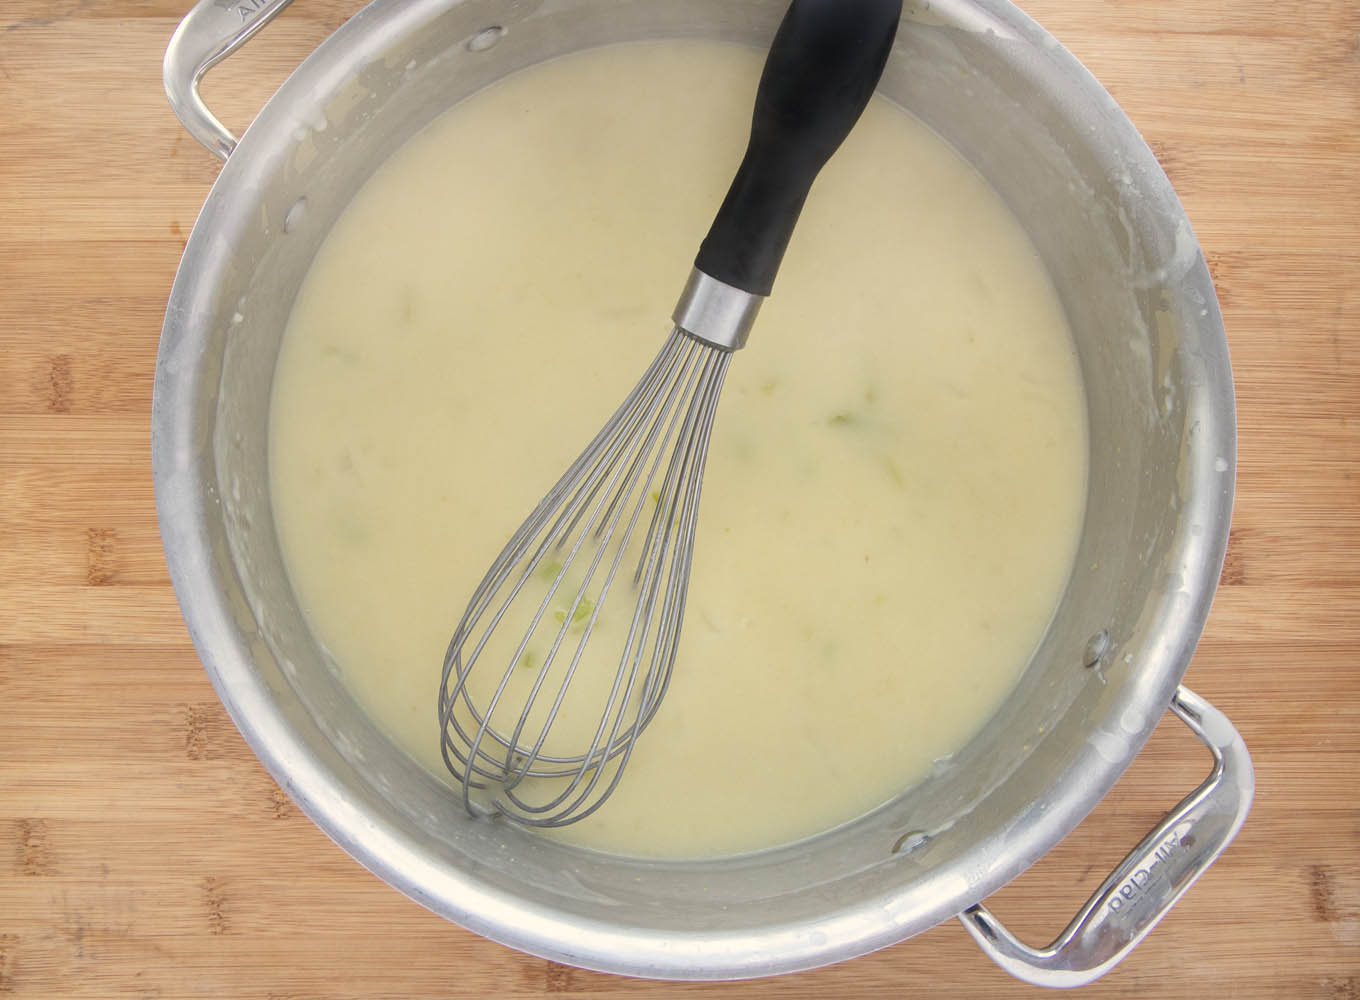 Veloute in a large pot with a wire whisk.